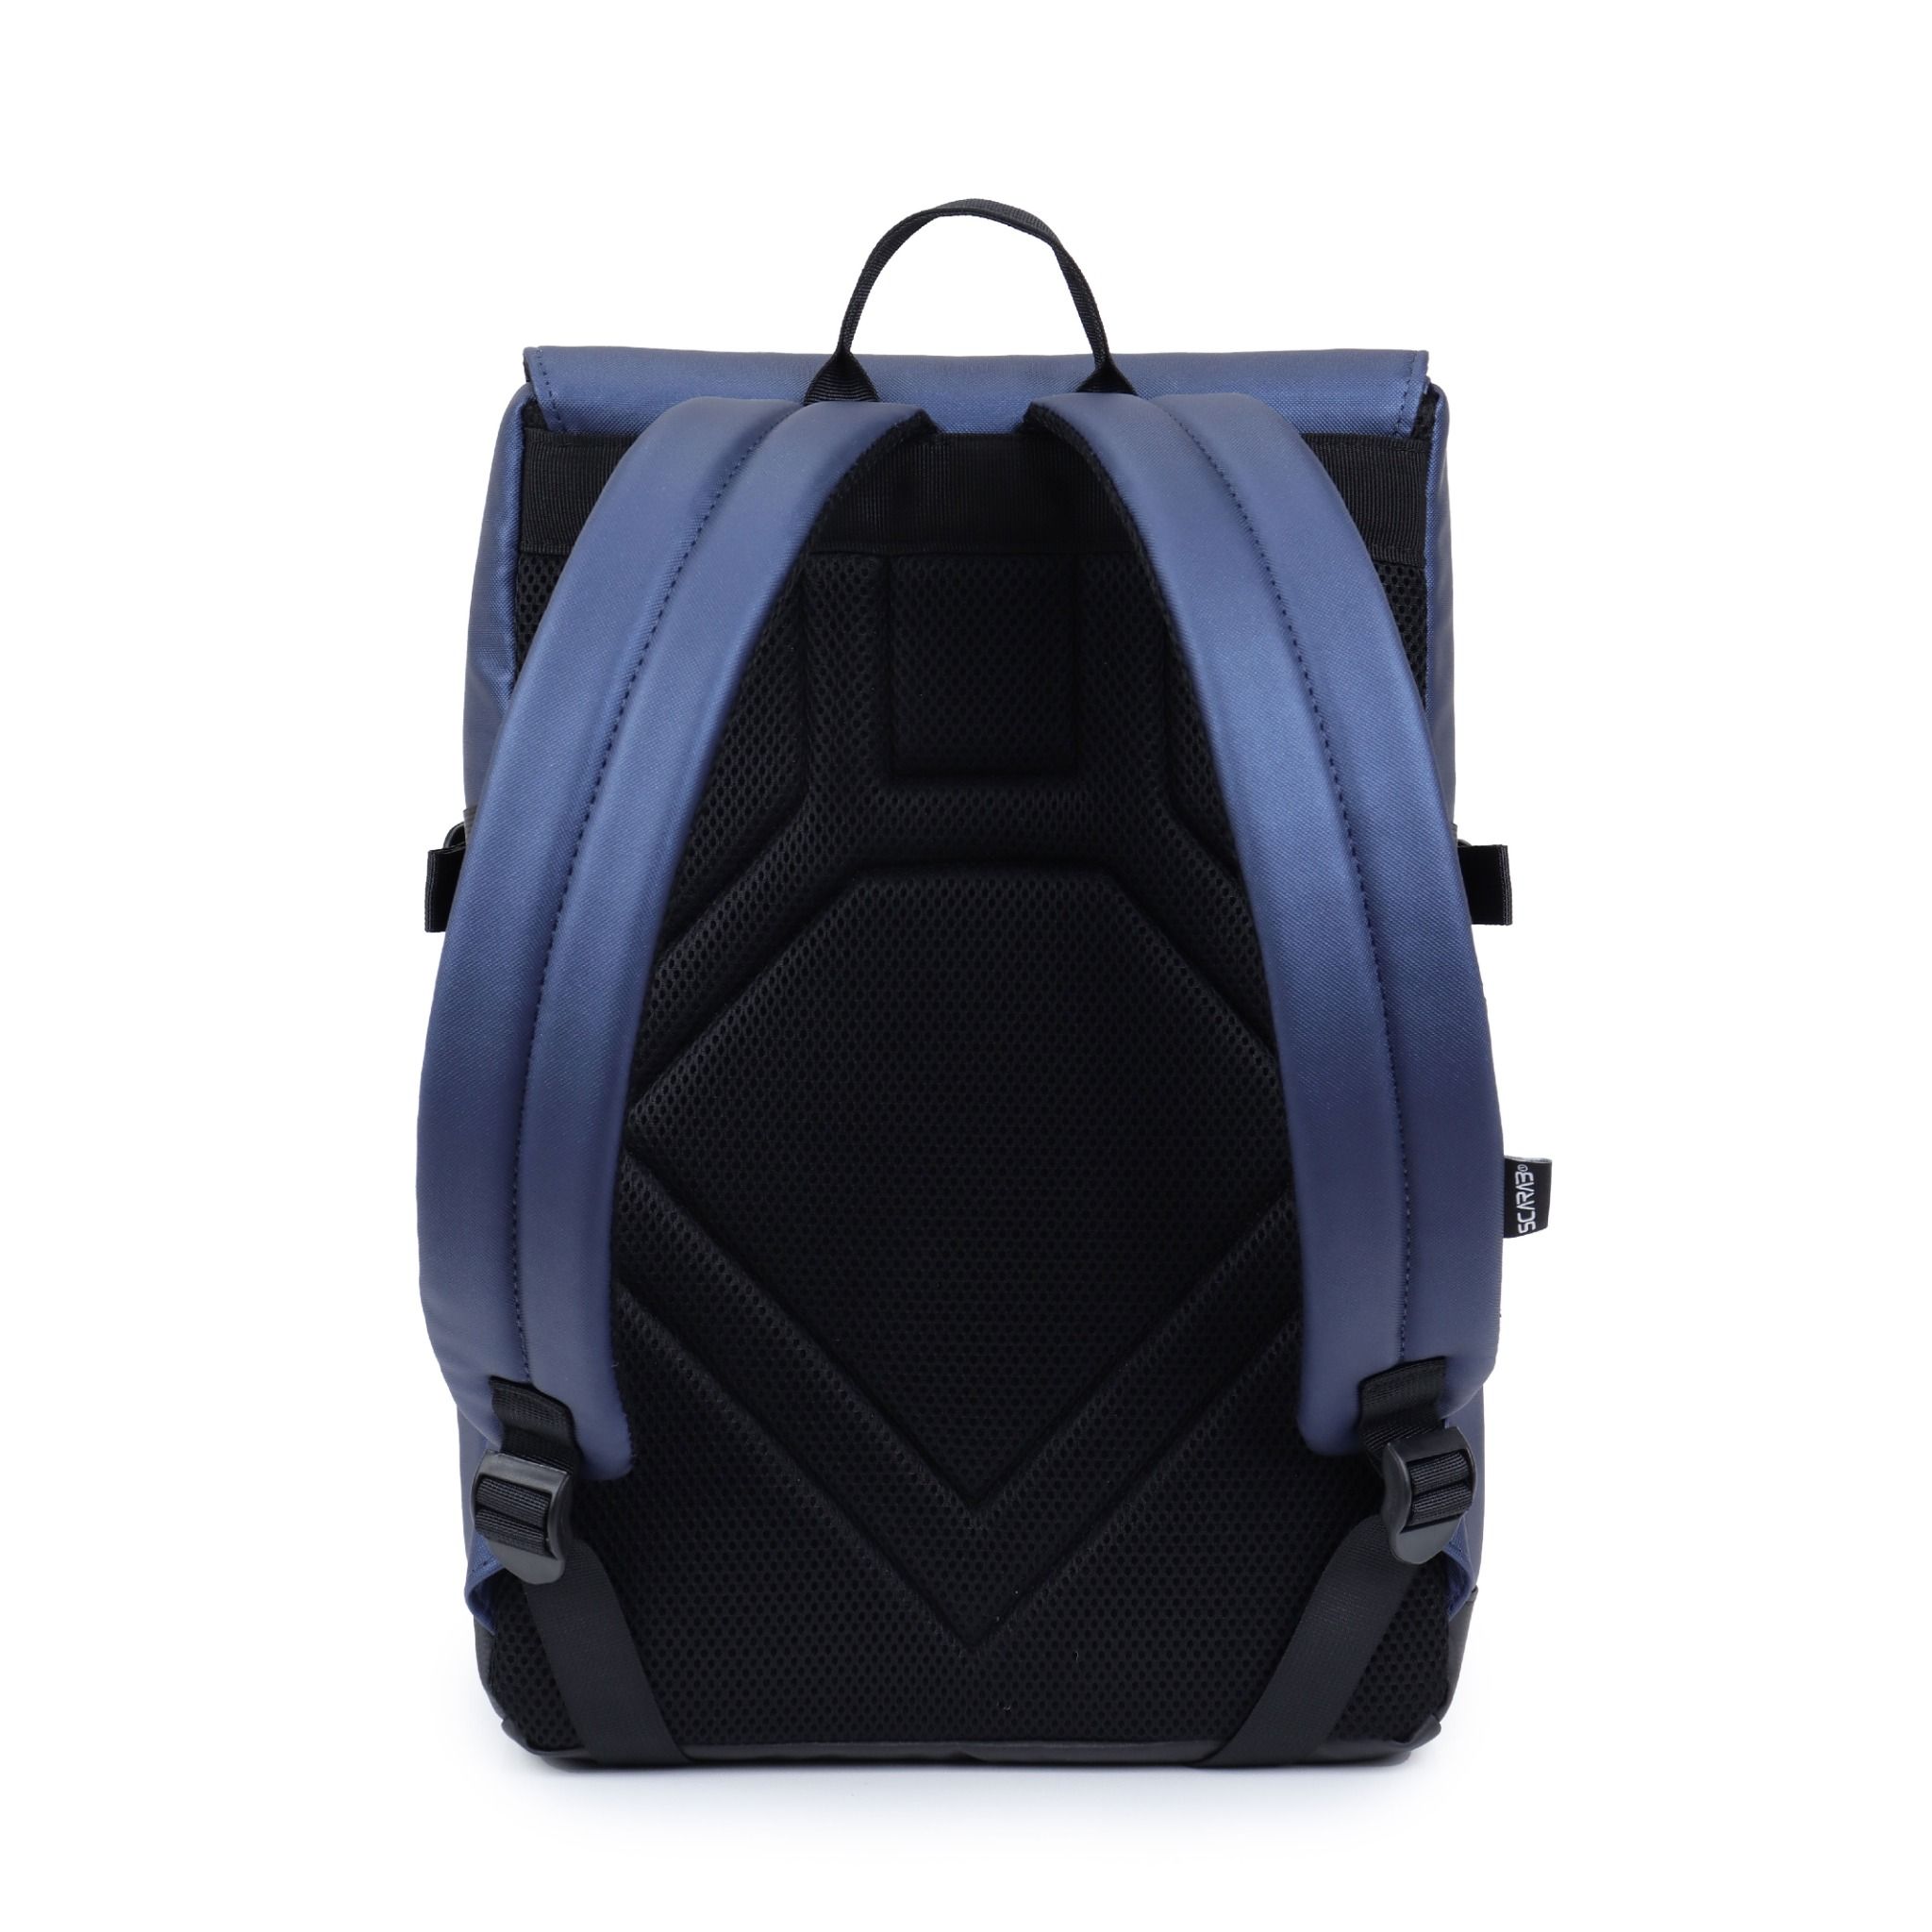  Urban Leather Backpack - Navy 